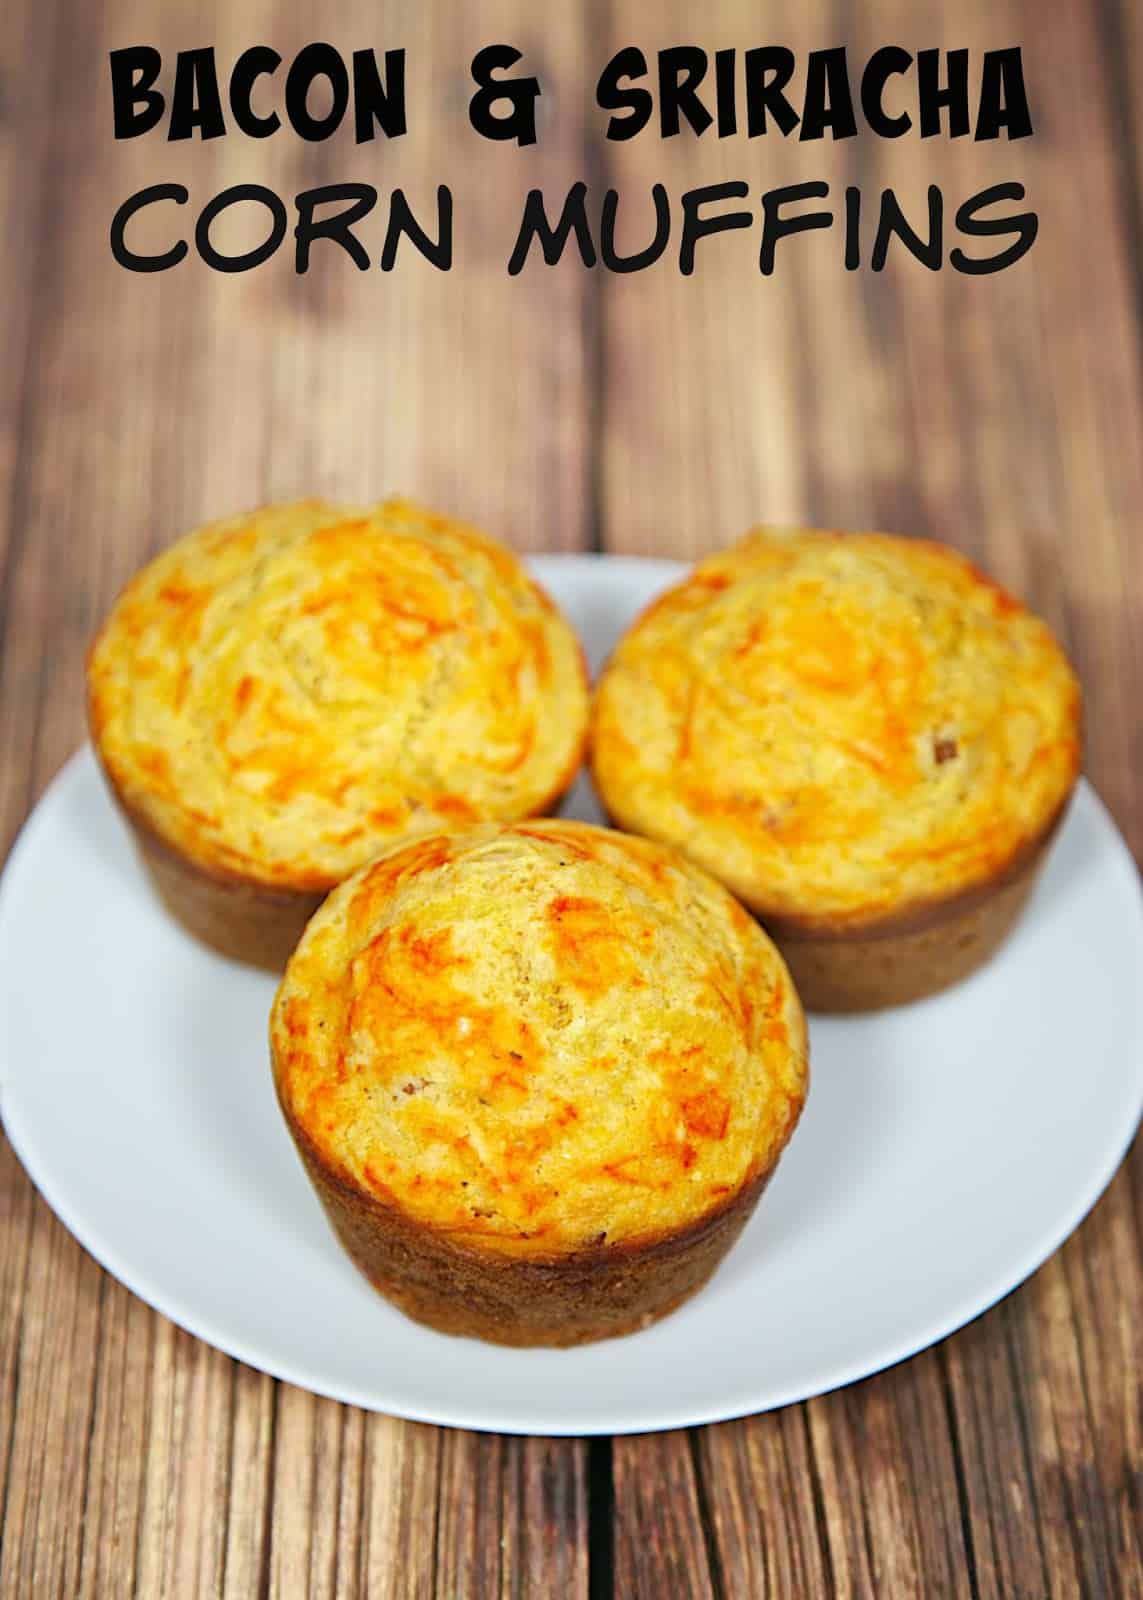 Bacon & Sriracha Corn Muffins Recipe - homemade corn muffins with bacon and a swirl of Sriracha. Great with soups, stews and grilled meats.